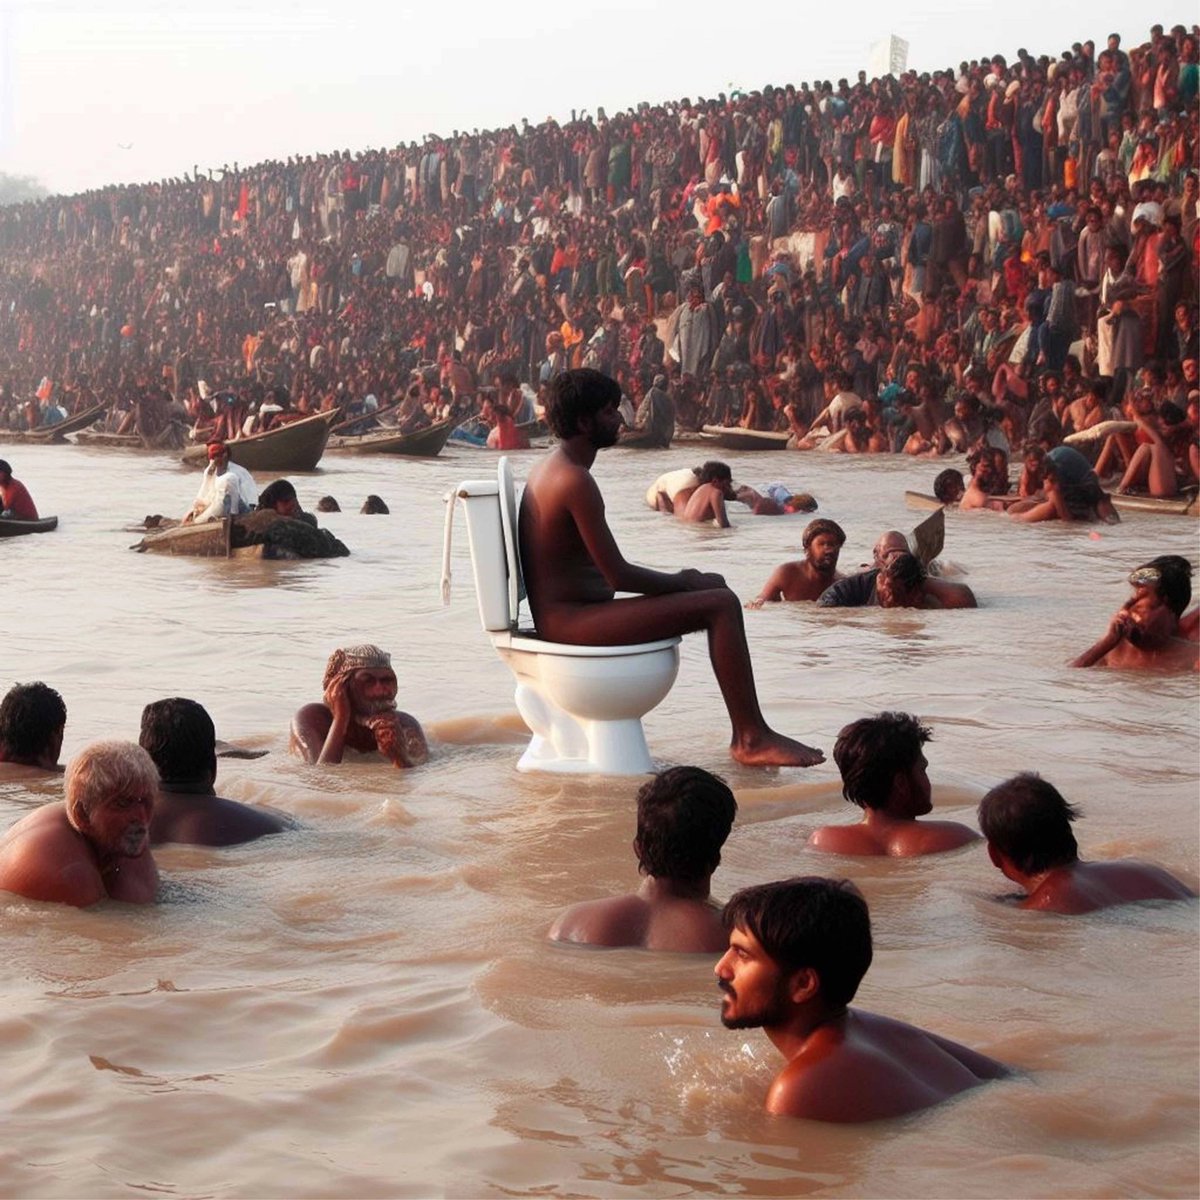 Pajeets swimming in Ganges River.